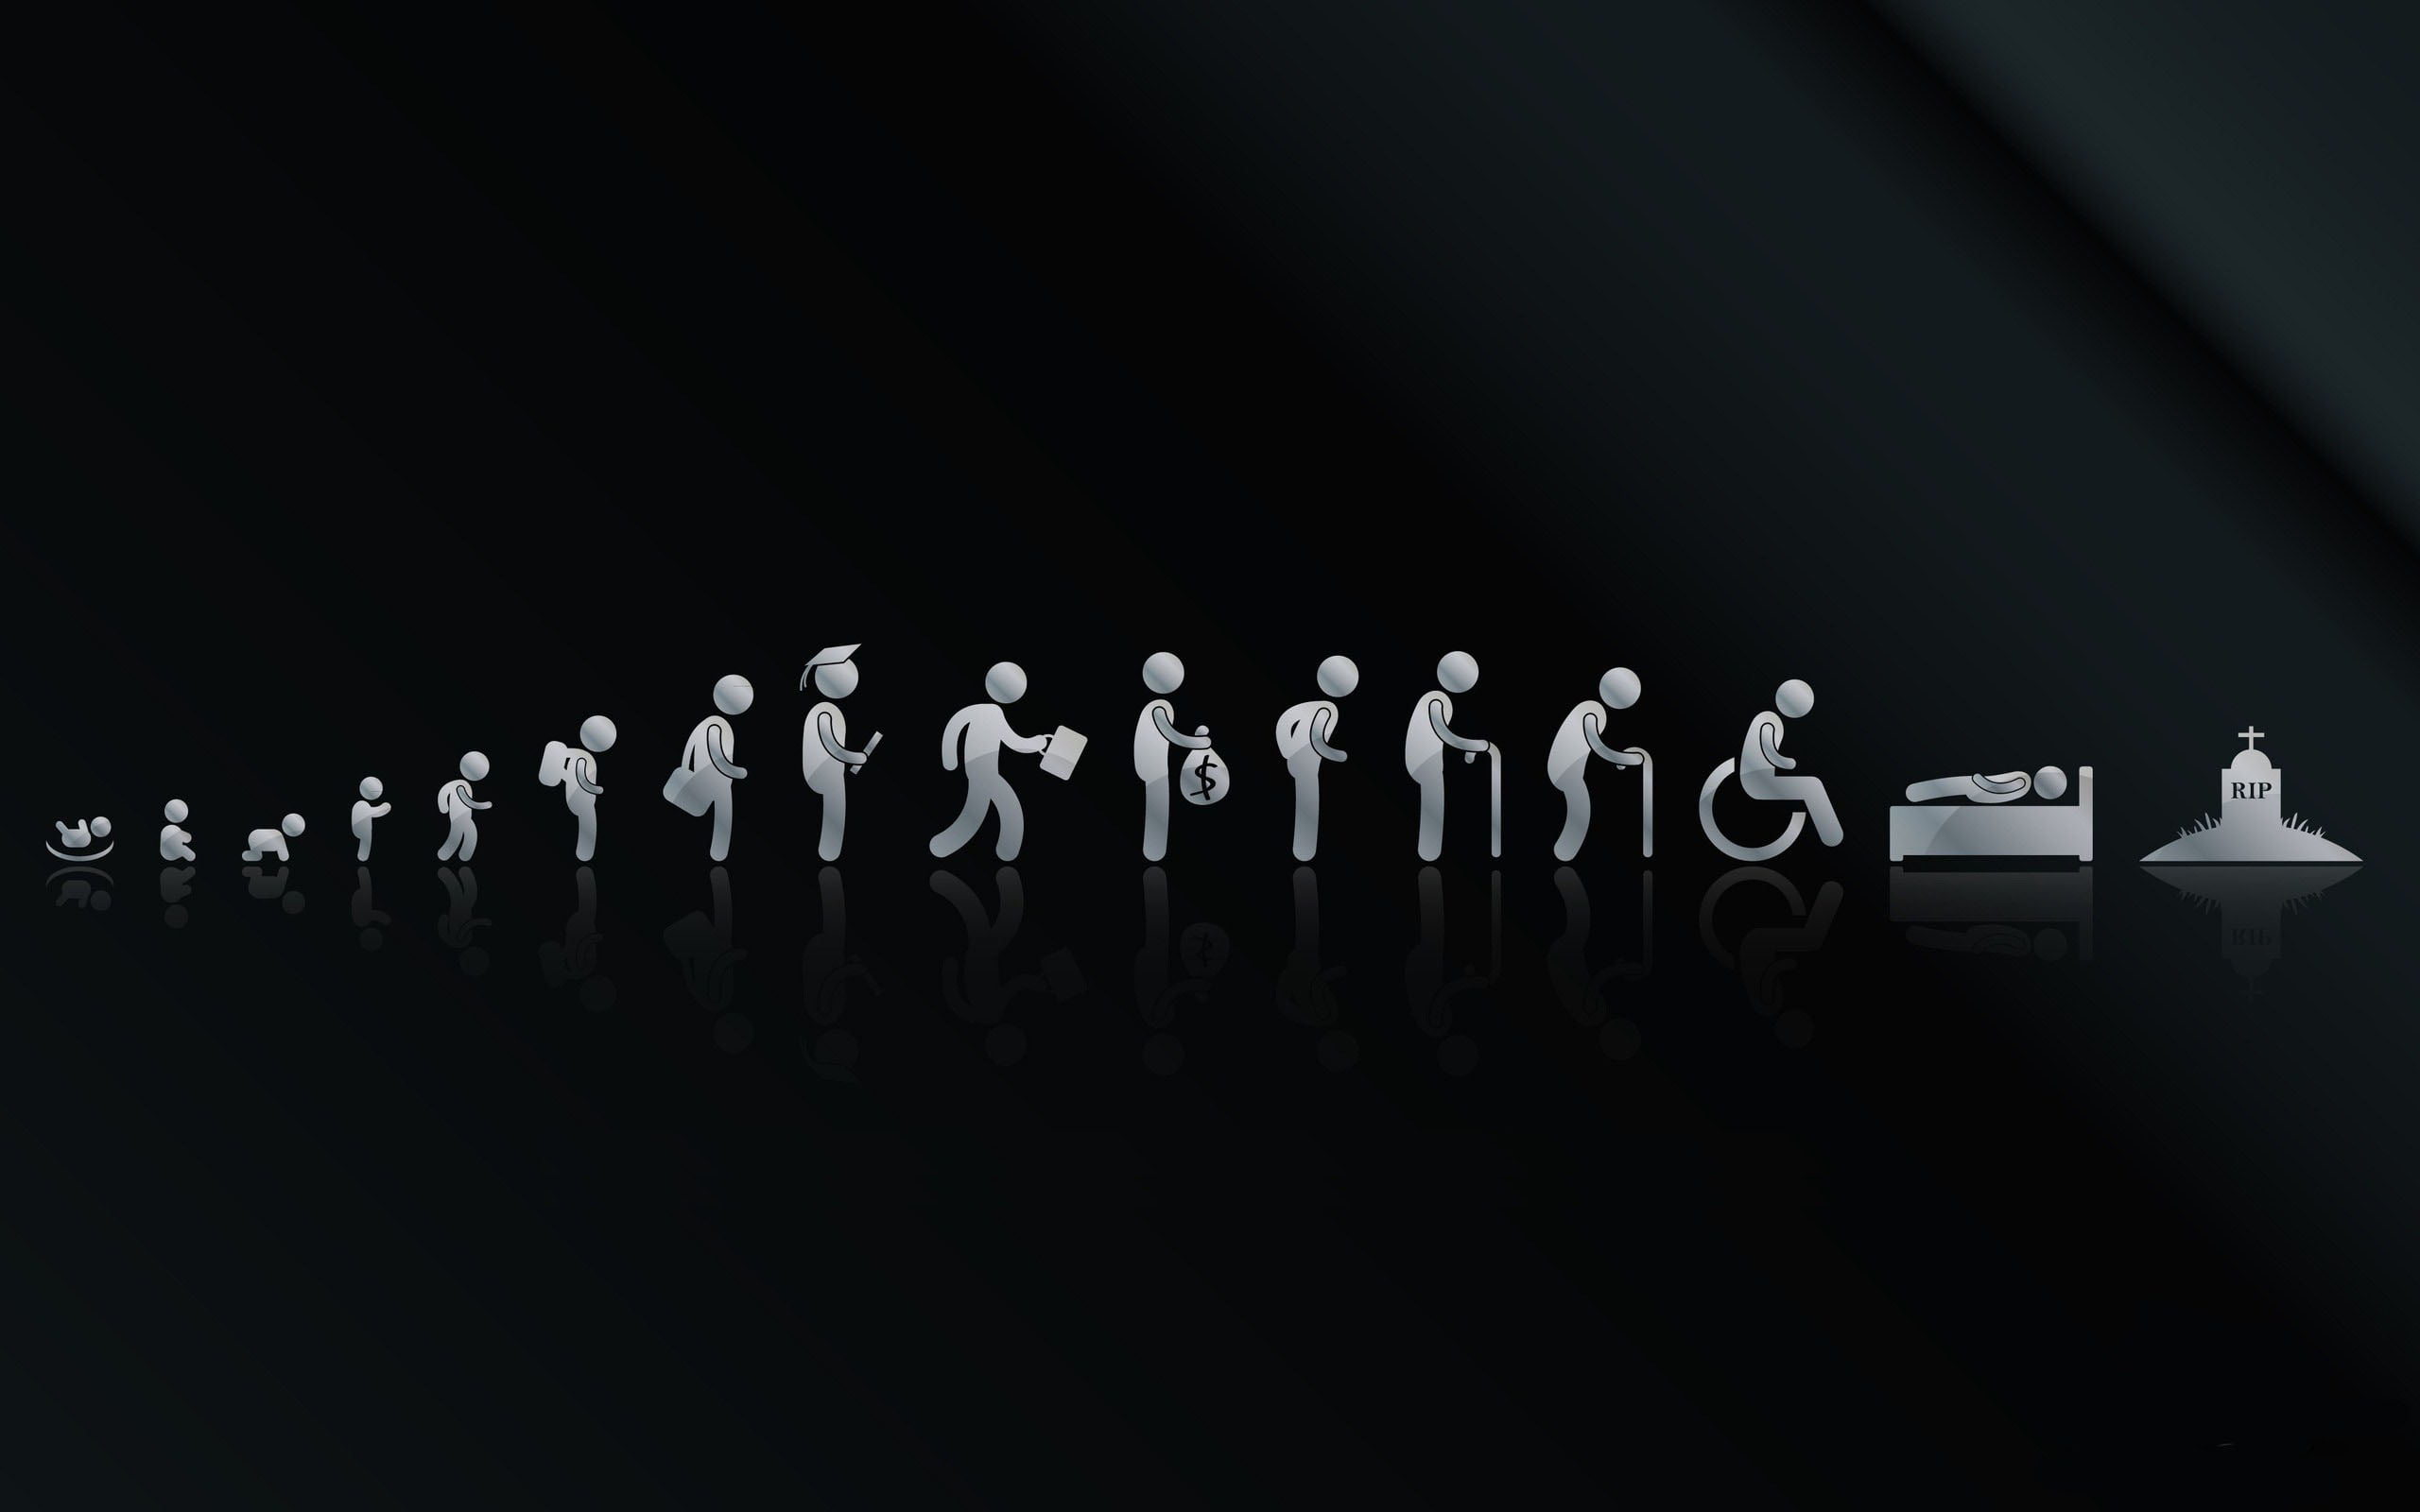 Life cycle illustration, productive life goes on illustration wallpaper